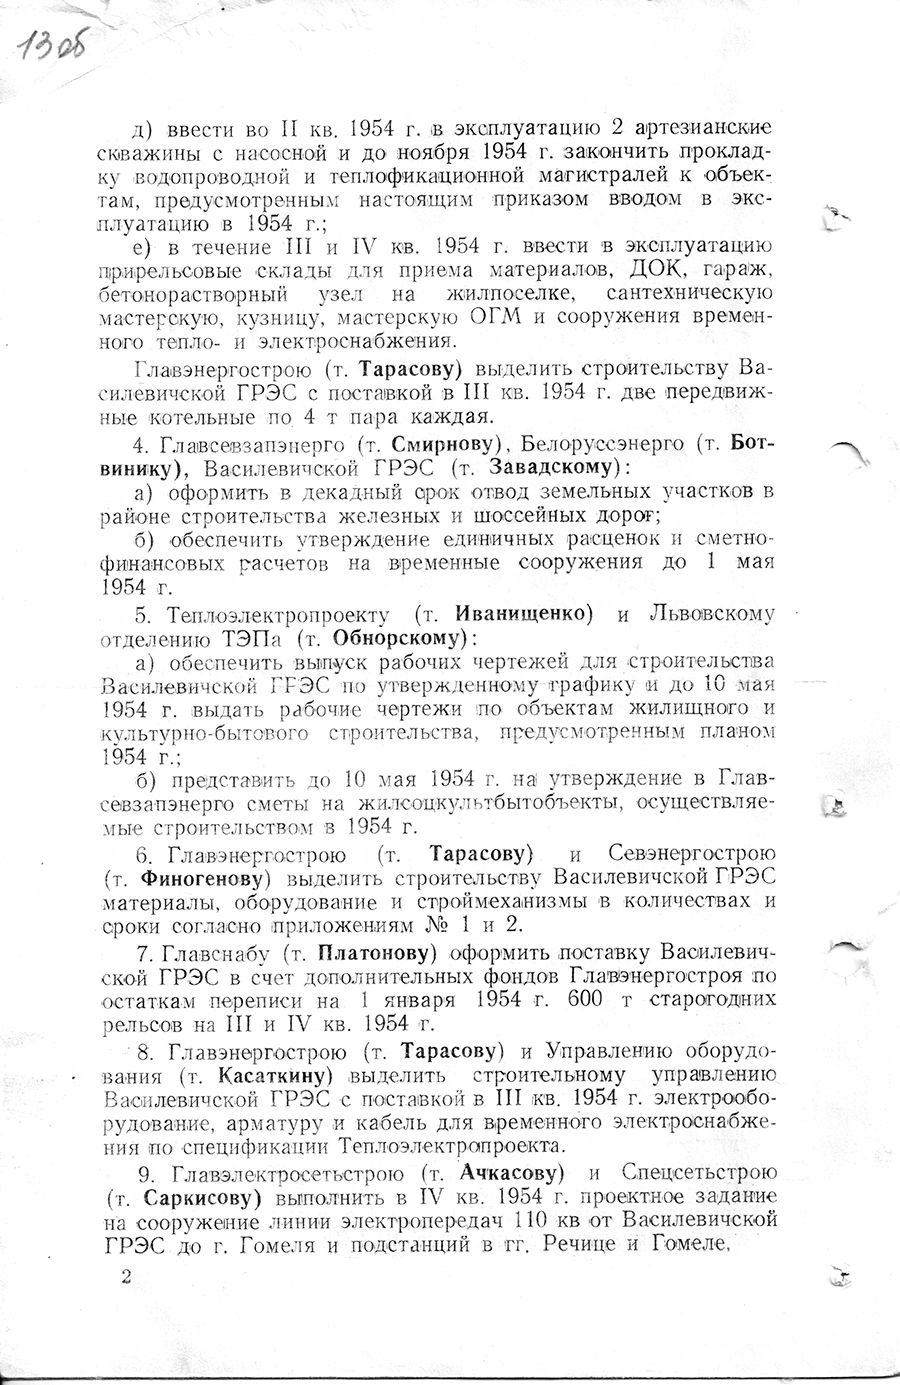 Order No. 206/A of the Ministry of Power Plants and Electric Medications of the USSR on the forcing of the construction of the Vasilevichi State District Power Plant-стр. 1